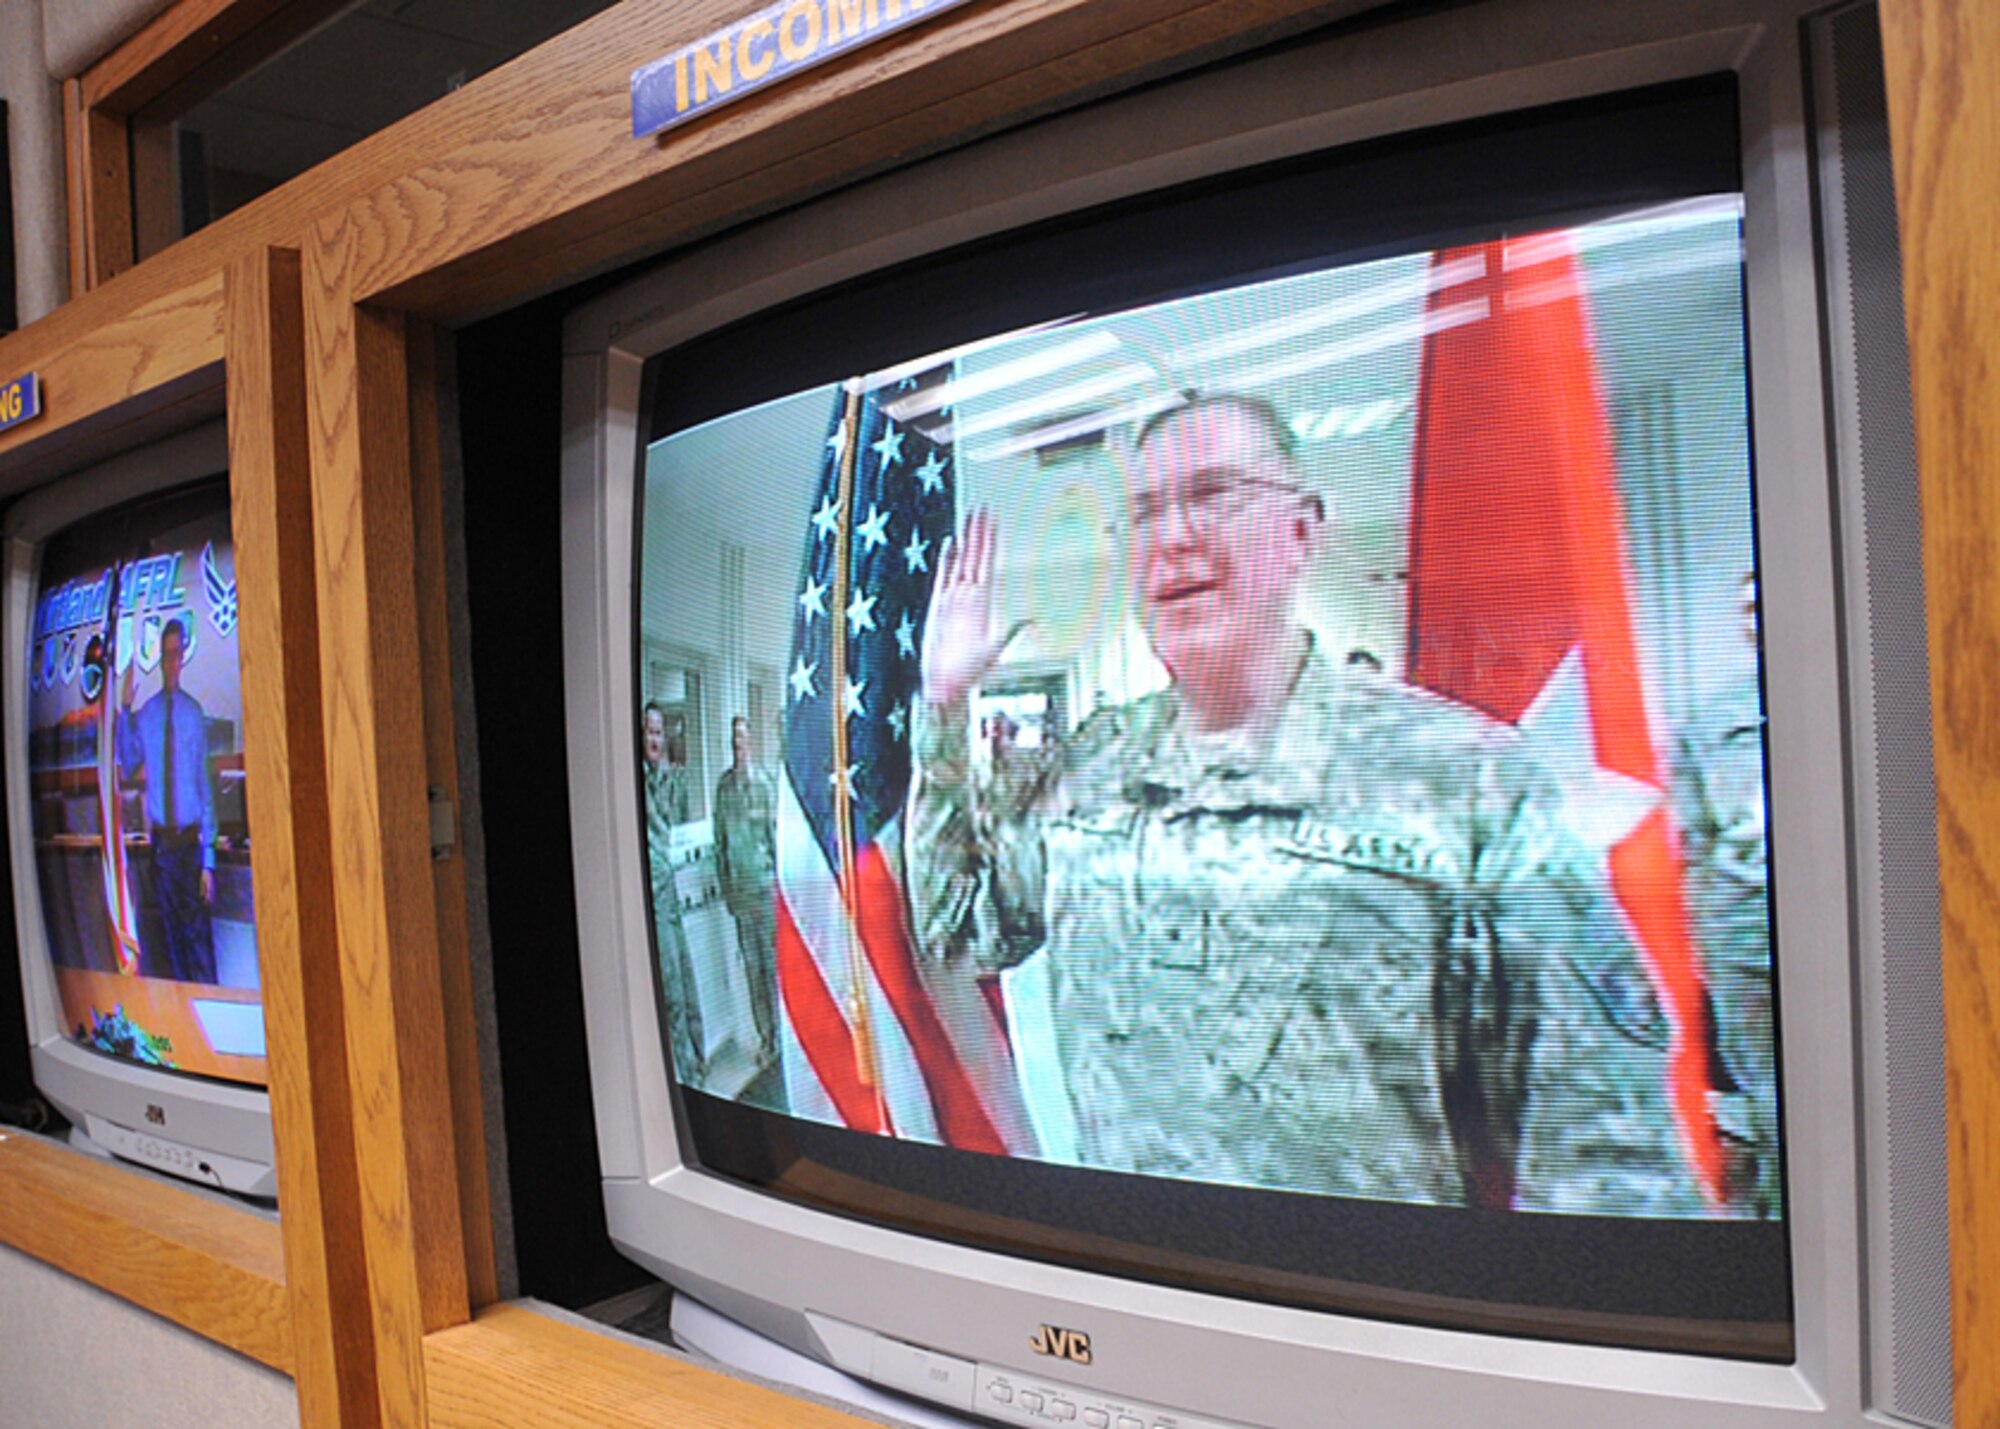 Retired Brigadier General Roger Ward, in Afghanistan, commissions his son, Greg Ward, into the Army via video teleconference Sept. 22 at the Air Force Research Laboratory VTC room.  U.S. Air Force Photo by Todd Berenger. 